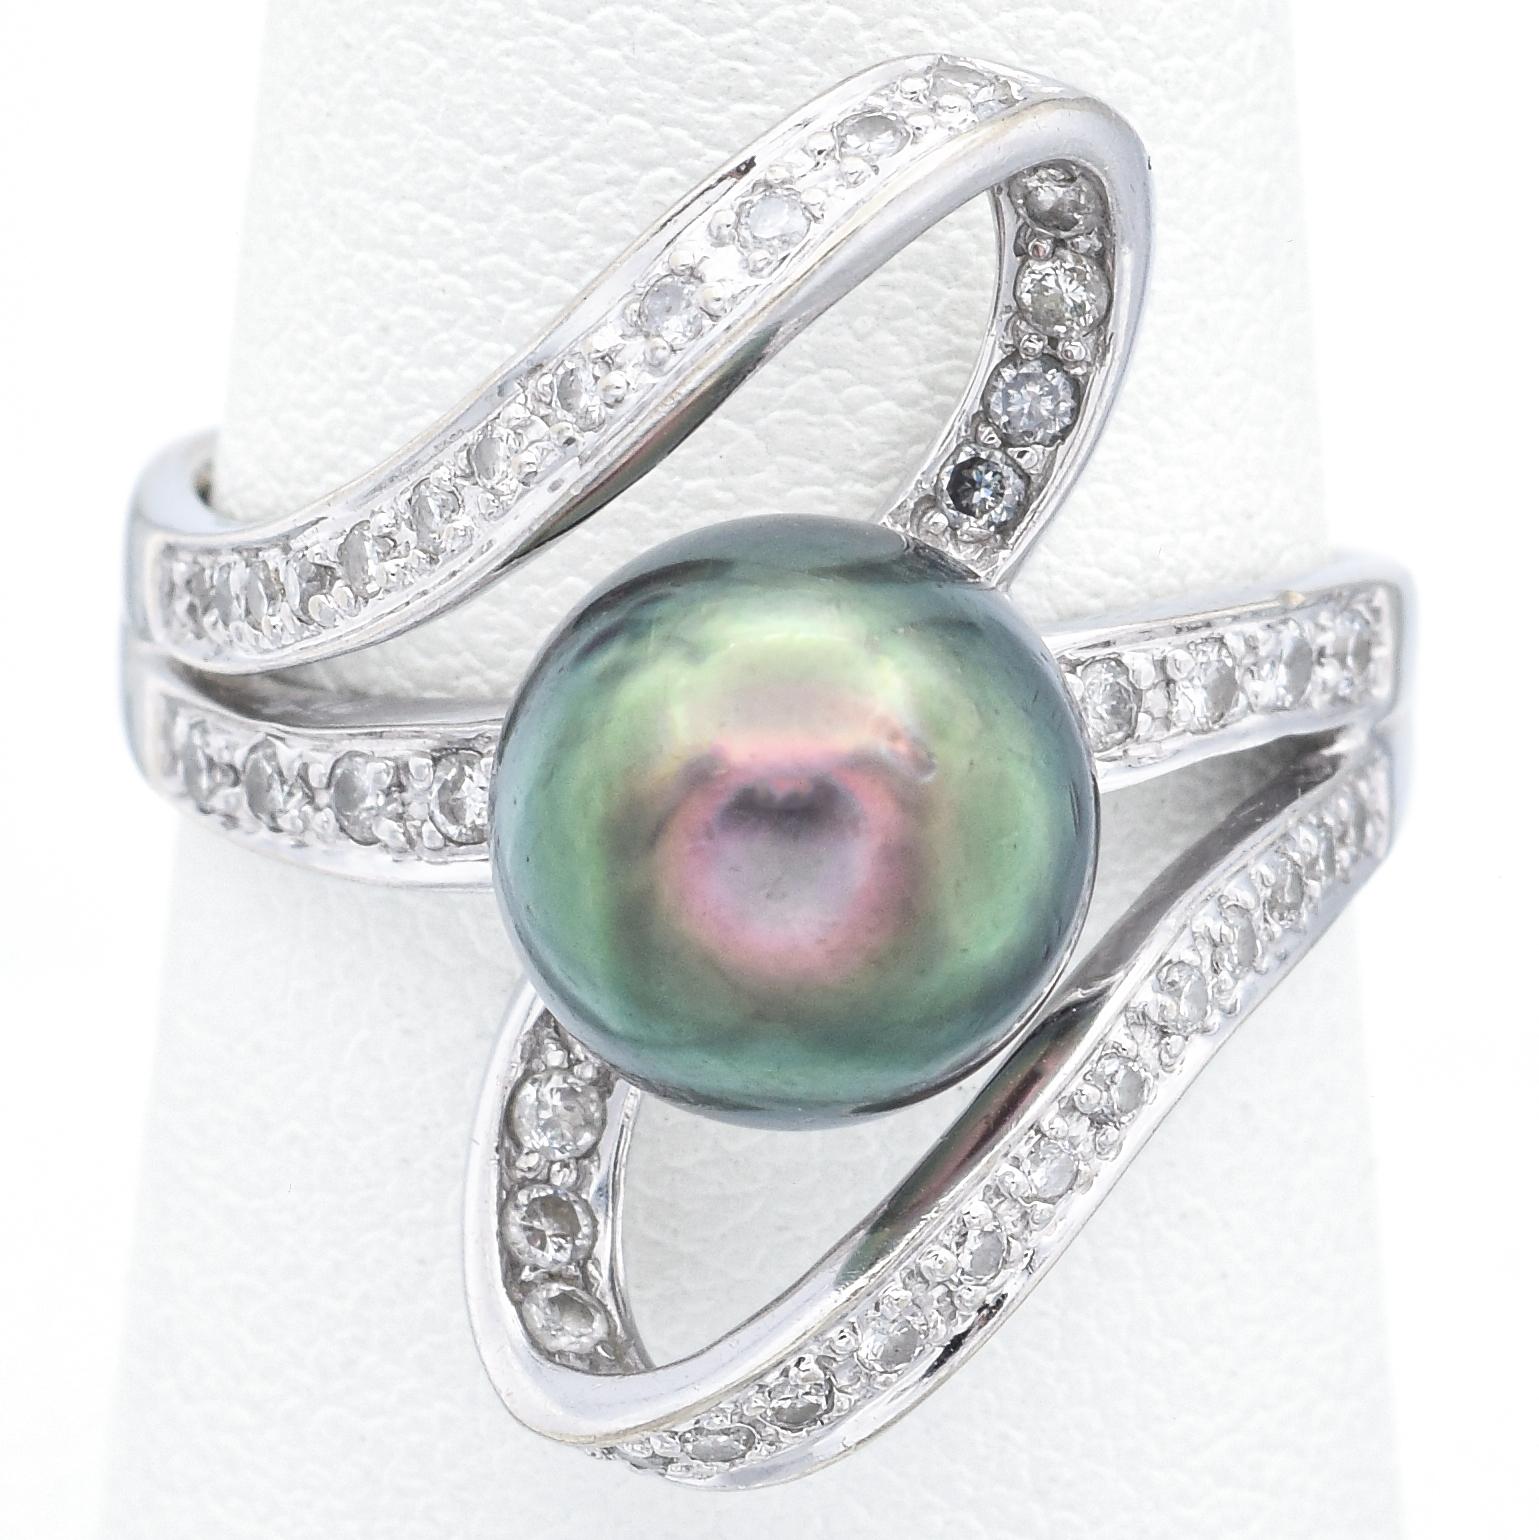 Weight: 6.5 Grams
Stone: Pearl (9 mm). Approx 0.40 TCW (0.01 ct) Diamonds
Face of Ring: 22.0 x 20.5 x 11.0 mm
Ring Size: 7.75
Hallmark: 14K 585

ITEM #:BR-1063-100423-03
